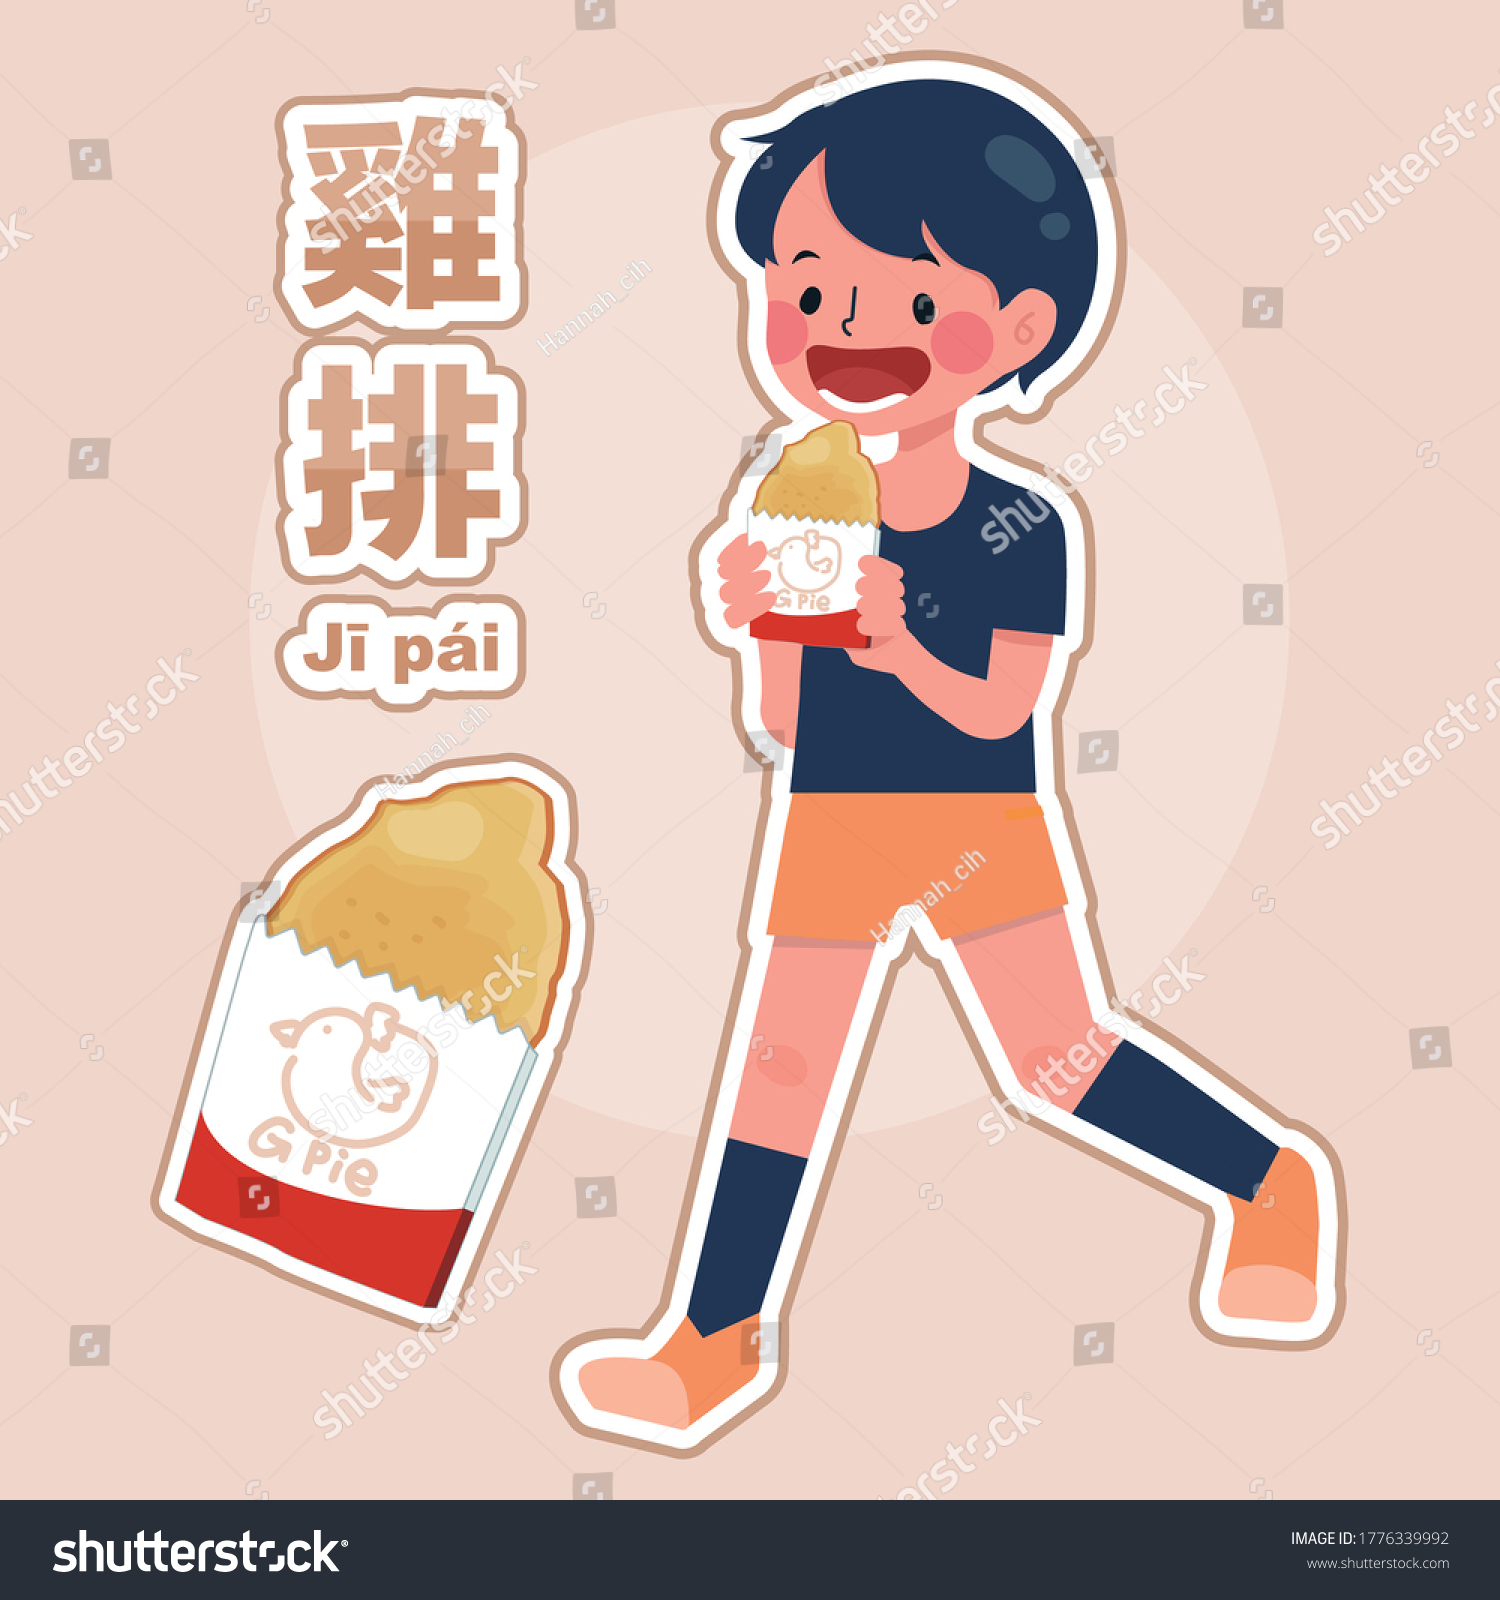 SVG of Taiwan boy happily with fried chicken cutlet, famous Taiwan food, Asia food style.Chinese characters mean fried chicken chop.  svg